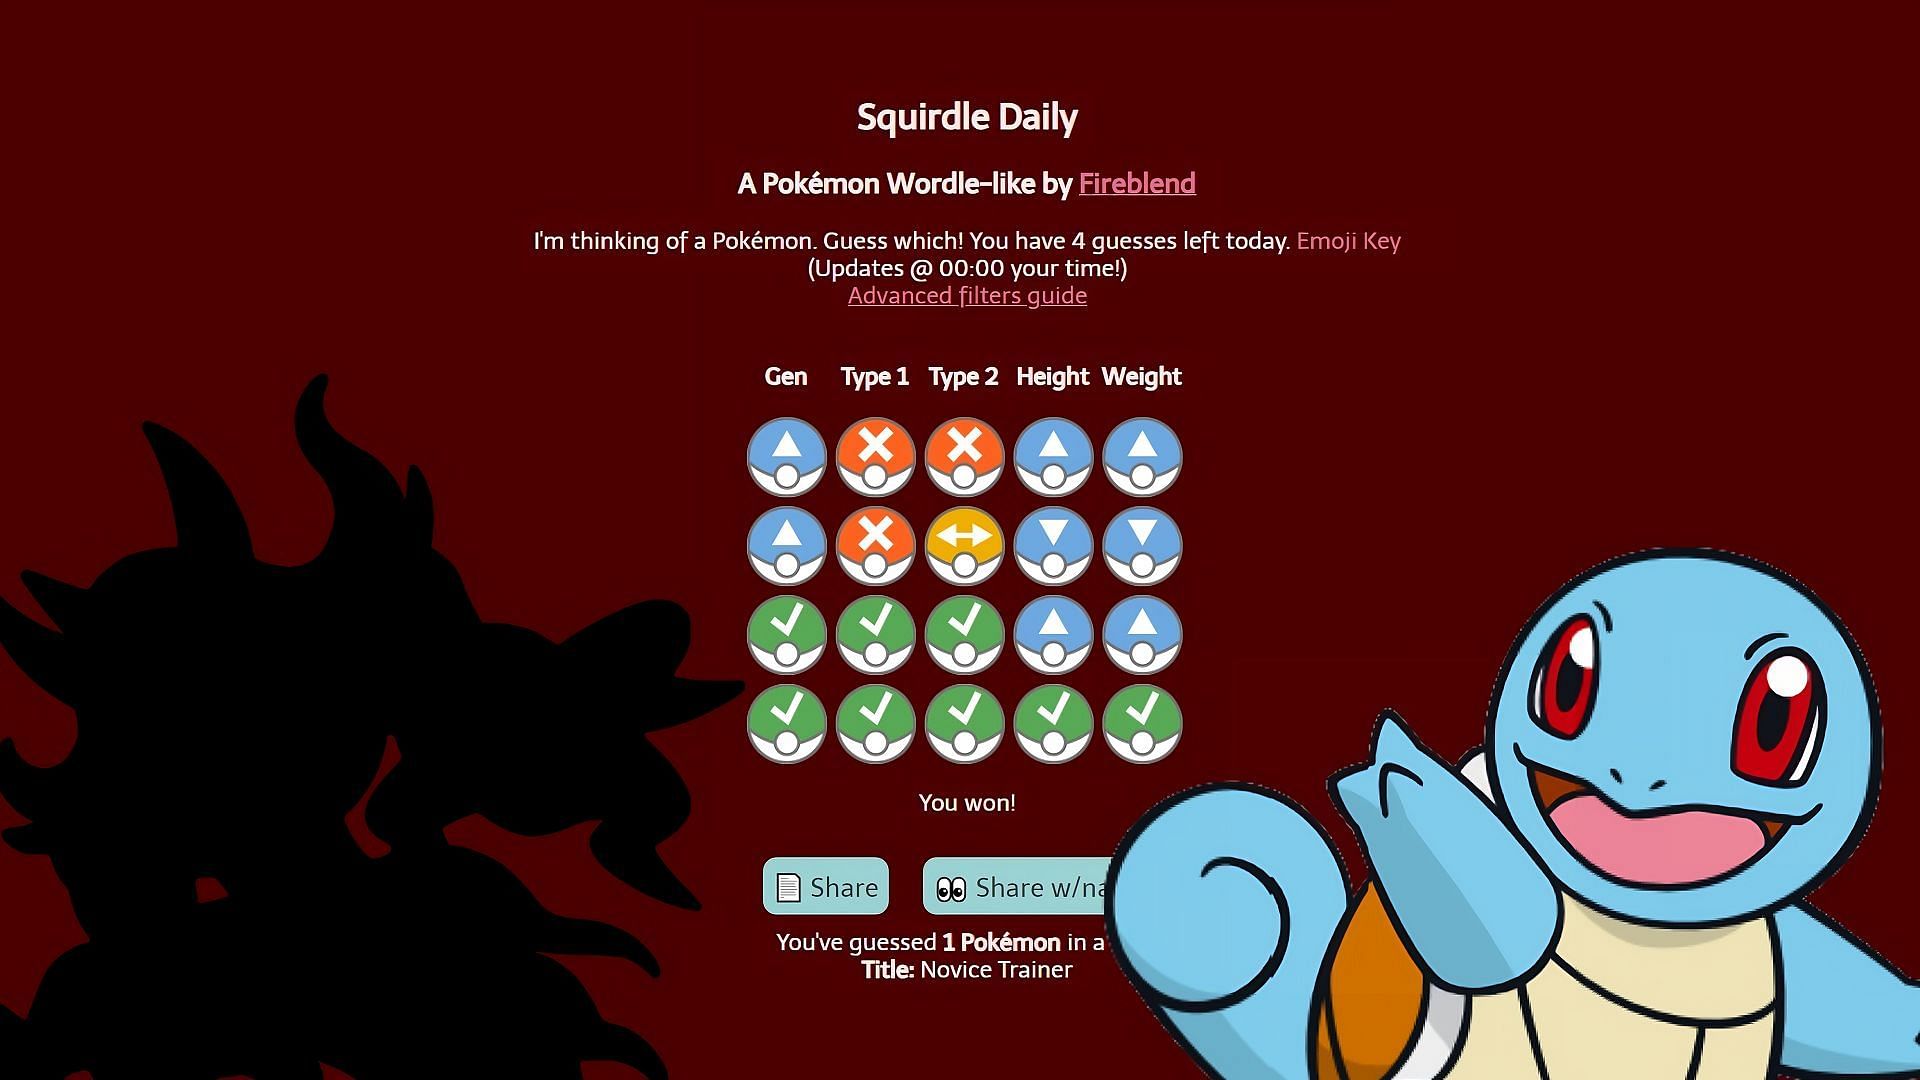 Squirdle tasks fans with guessing a mystery Pokemon in a similar sense to Wordle.